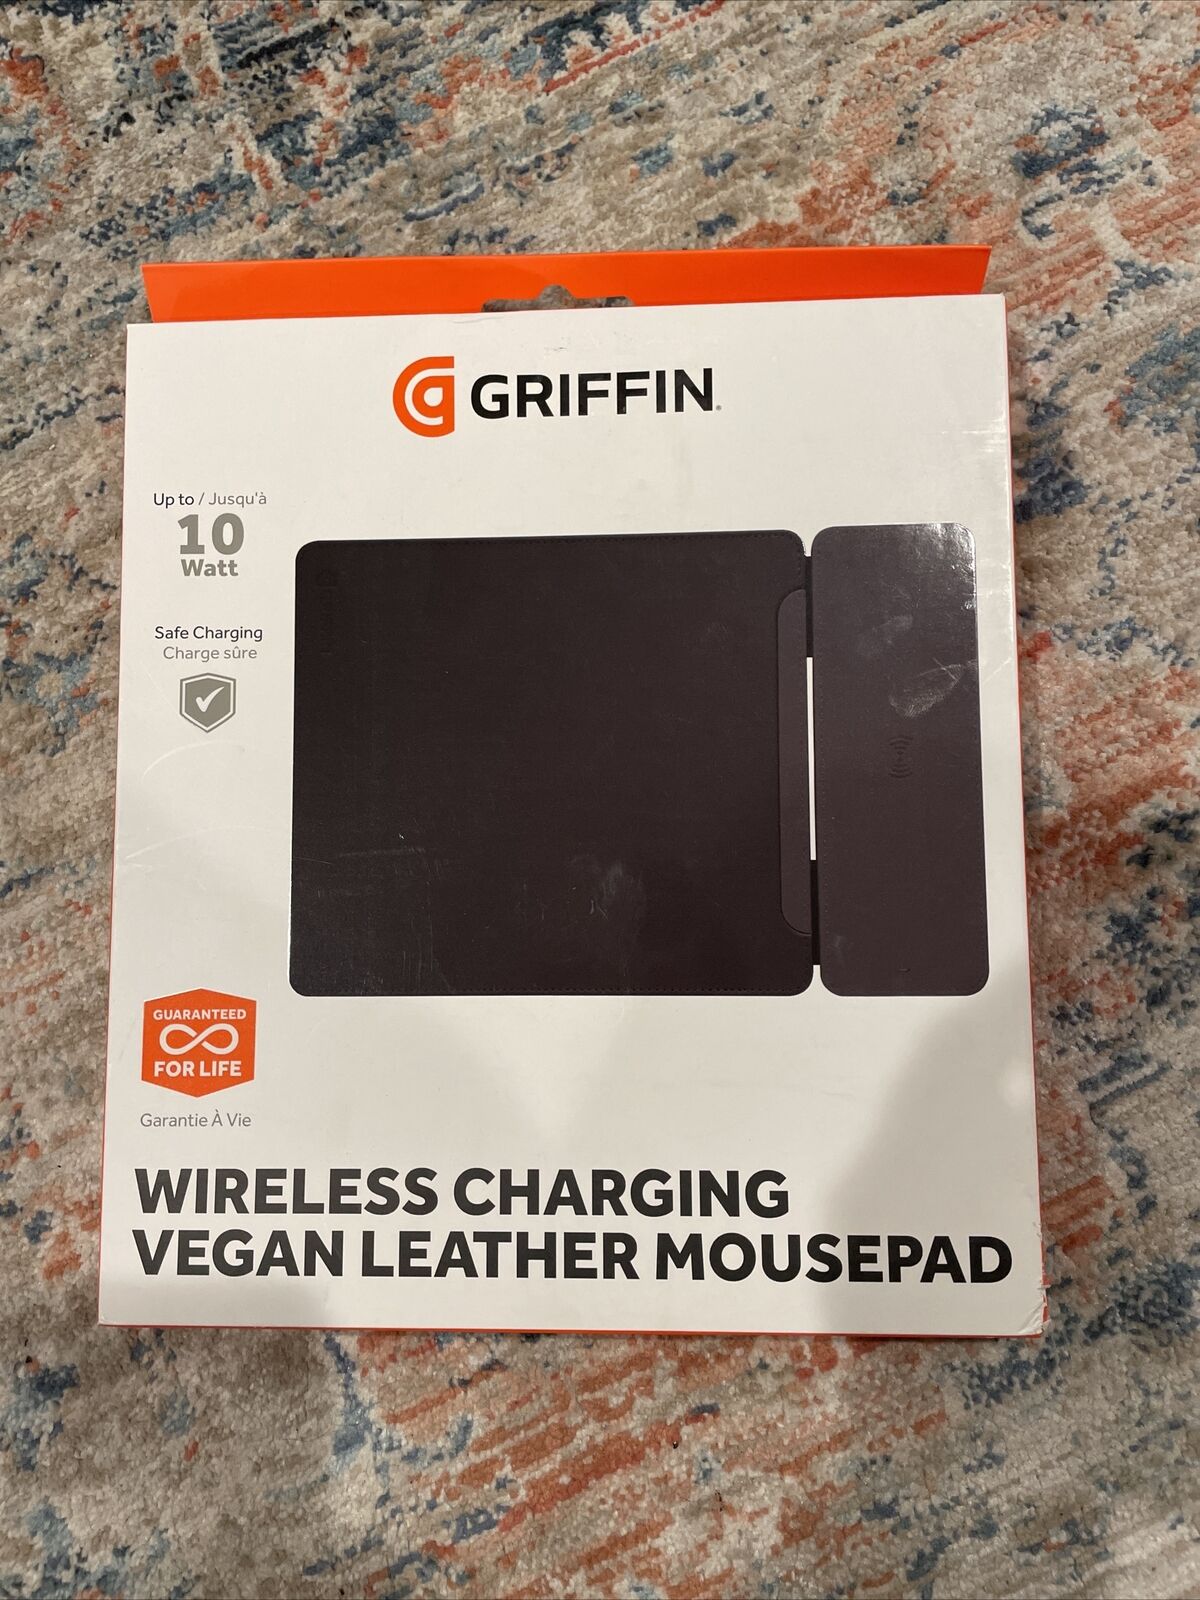 GRIFFIN Wireless Charging Vegan Leather Mousepad 10w Charger